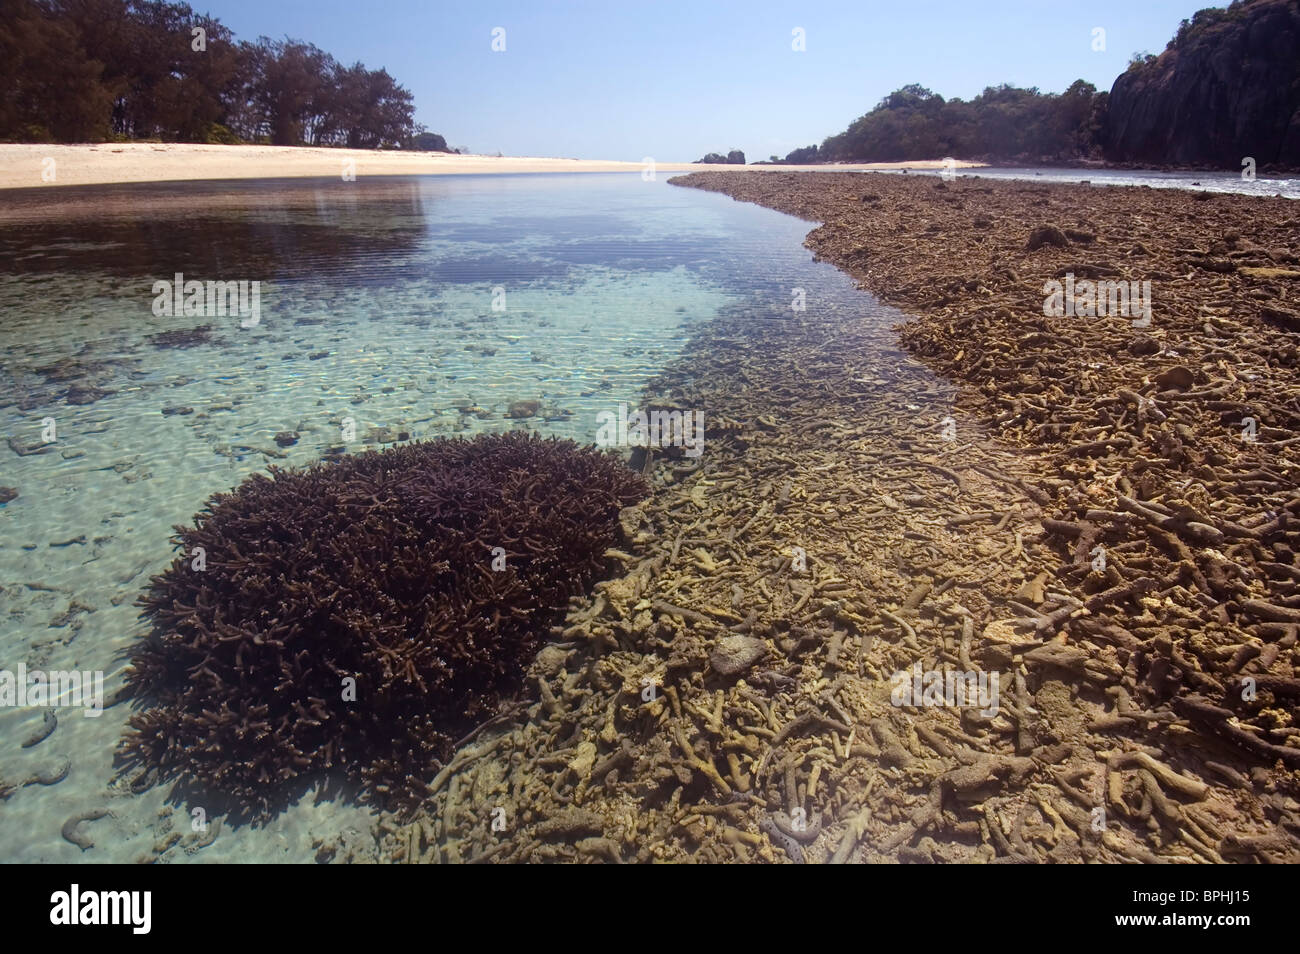 Healthy Acropora coral growing in lagoon, Russell Island, Frankland Islands National Park, Great Barrier Reef Marine Park Stock Photo